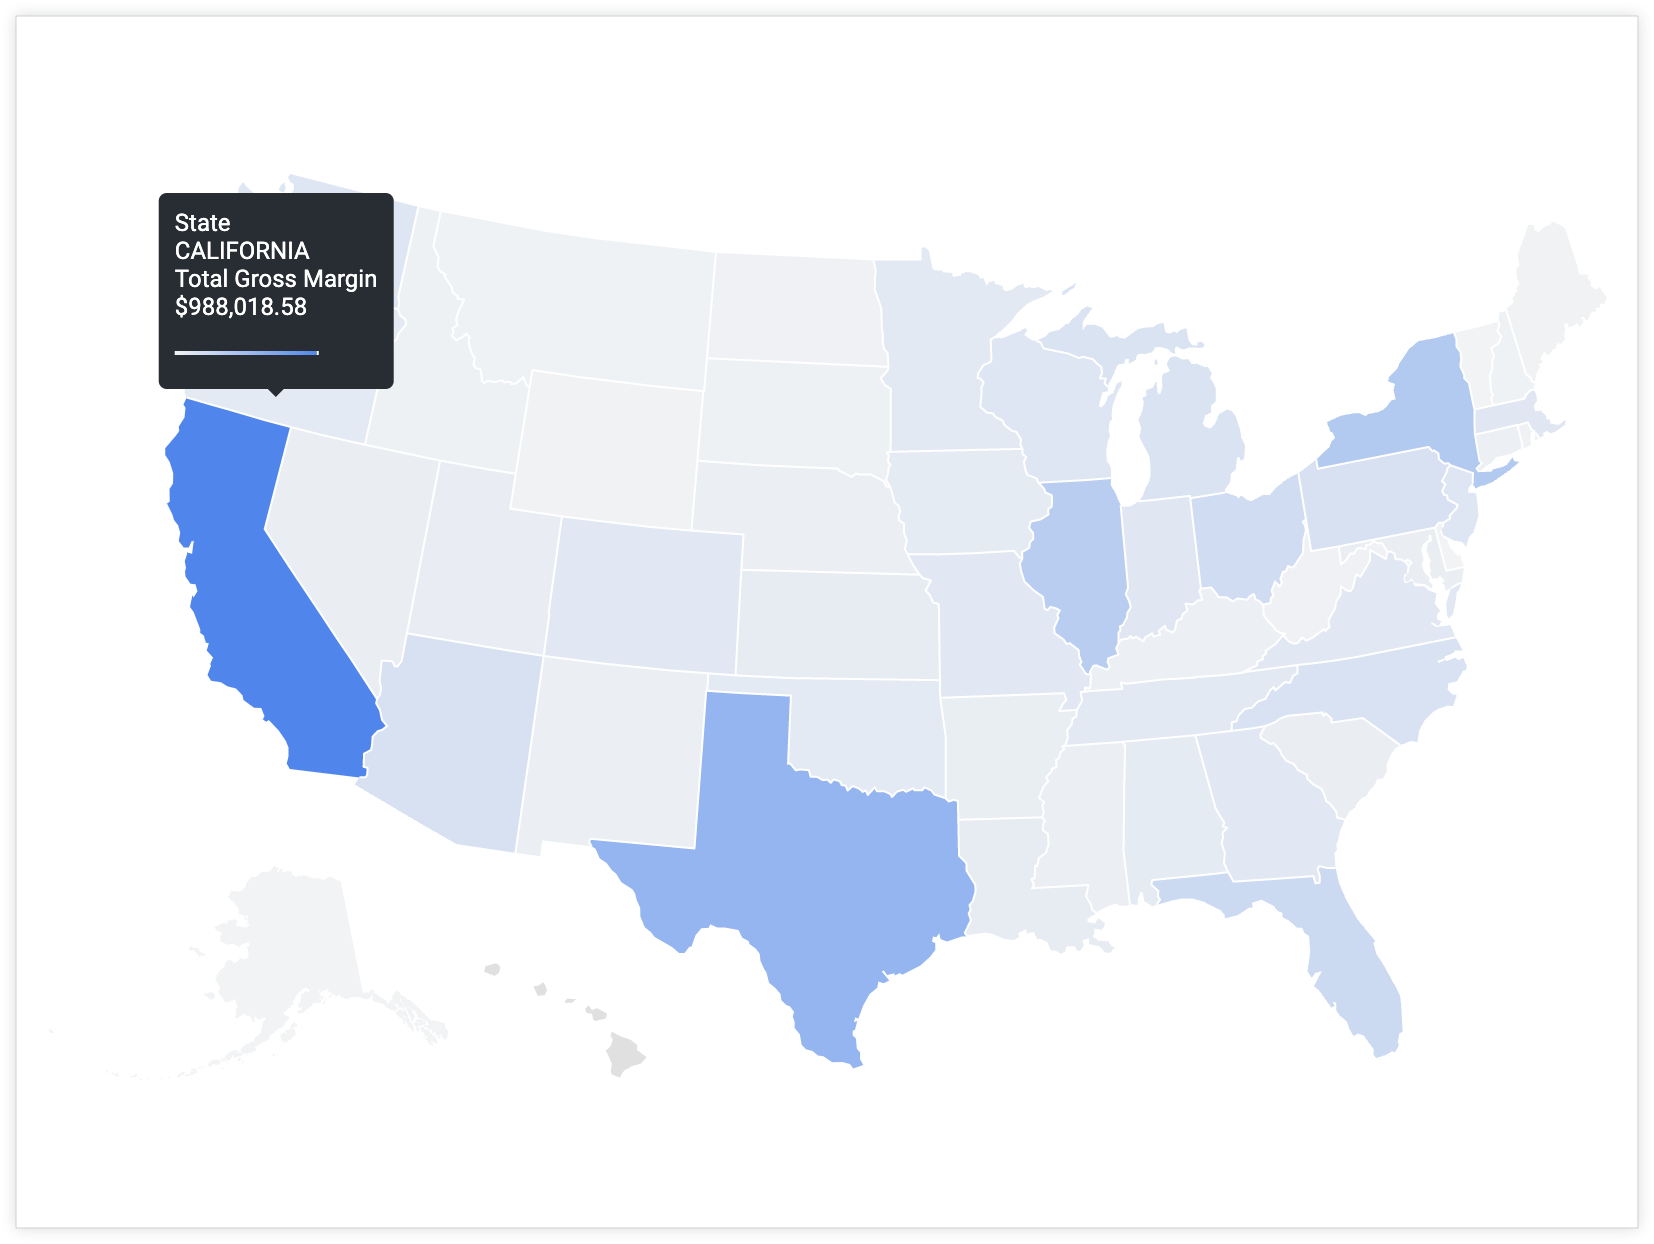 A user hovers their cursor over California to display a tooltip with the State value 'California' and Total Gross Margin value '$988,018.58'.